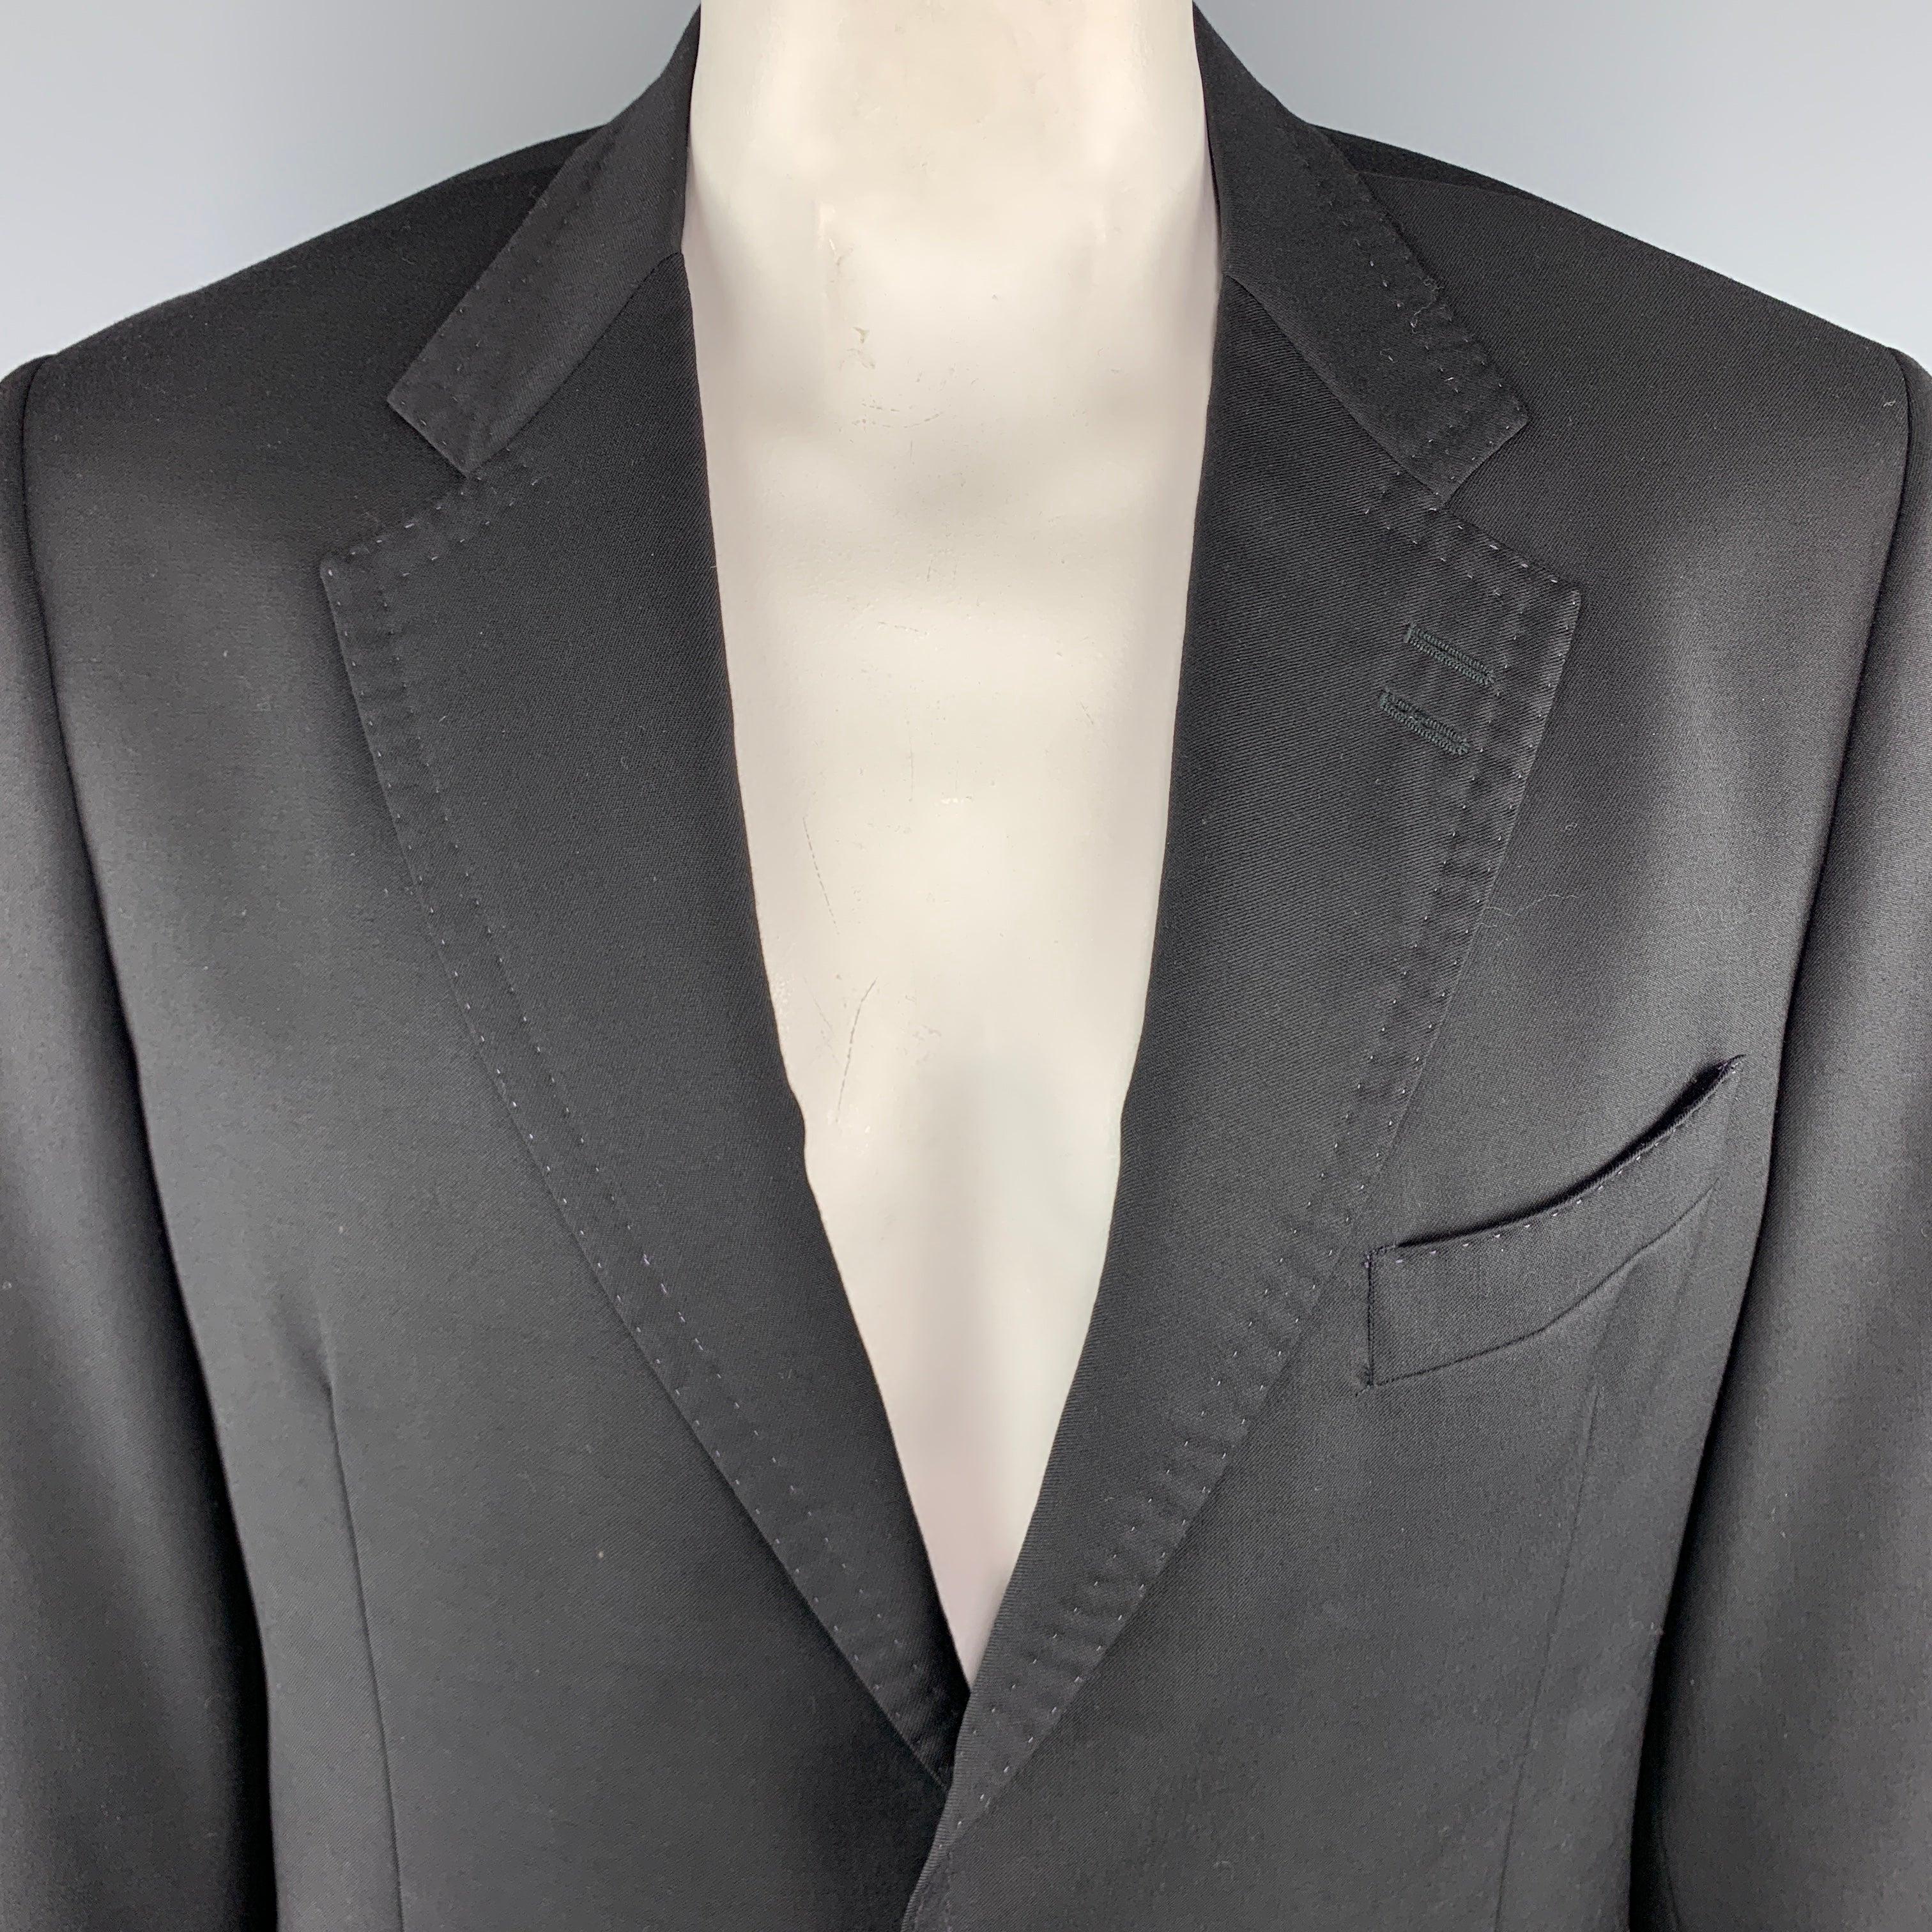 PAUL SMITH
Sport Coat comes in a black tone in a solid wool / cashmere material, with a notch lapel, slit and patch pockets, stitches finishing throughout, silver tone metal buttons, two buttons at closure, single breasted, buttoned cuffs, and a